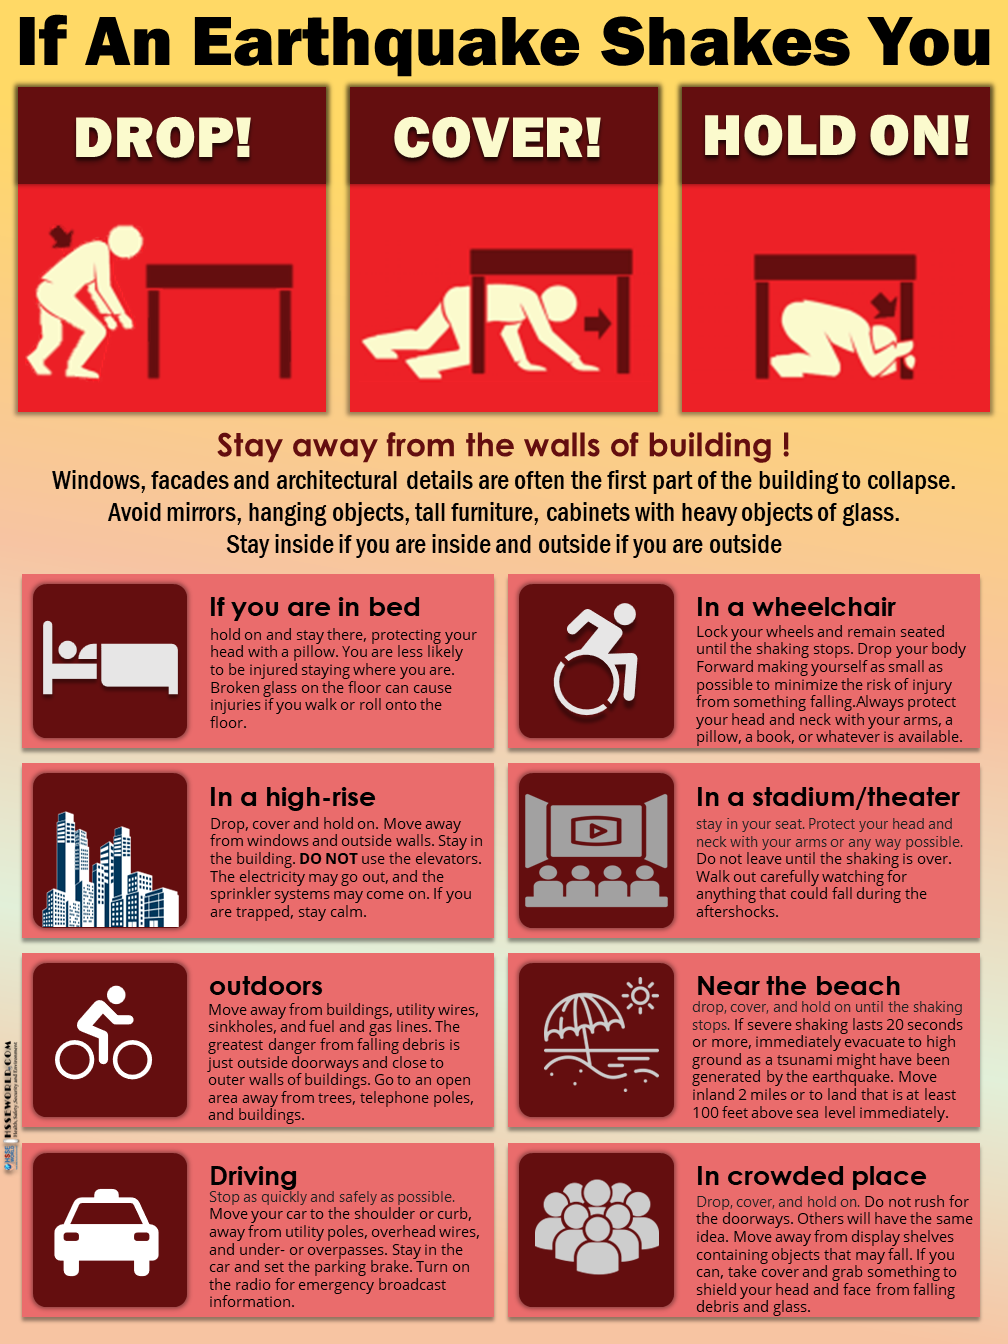 earthquake safety poster